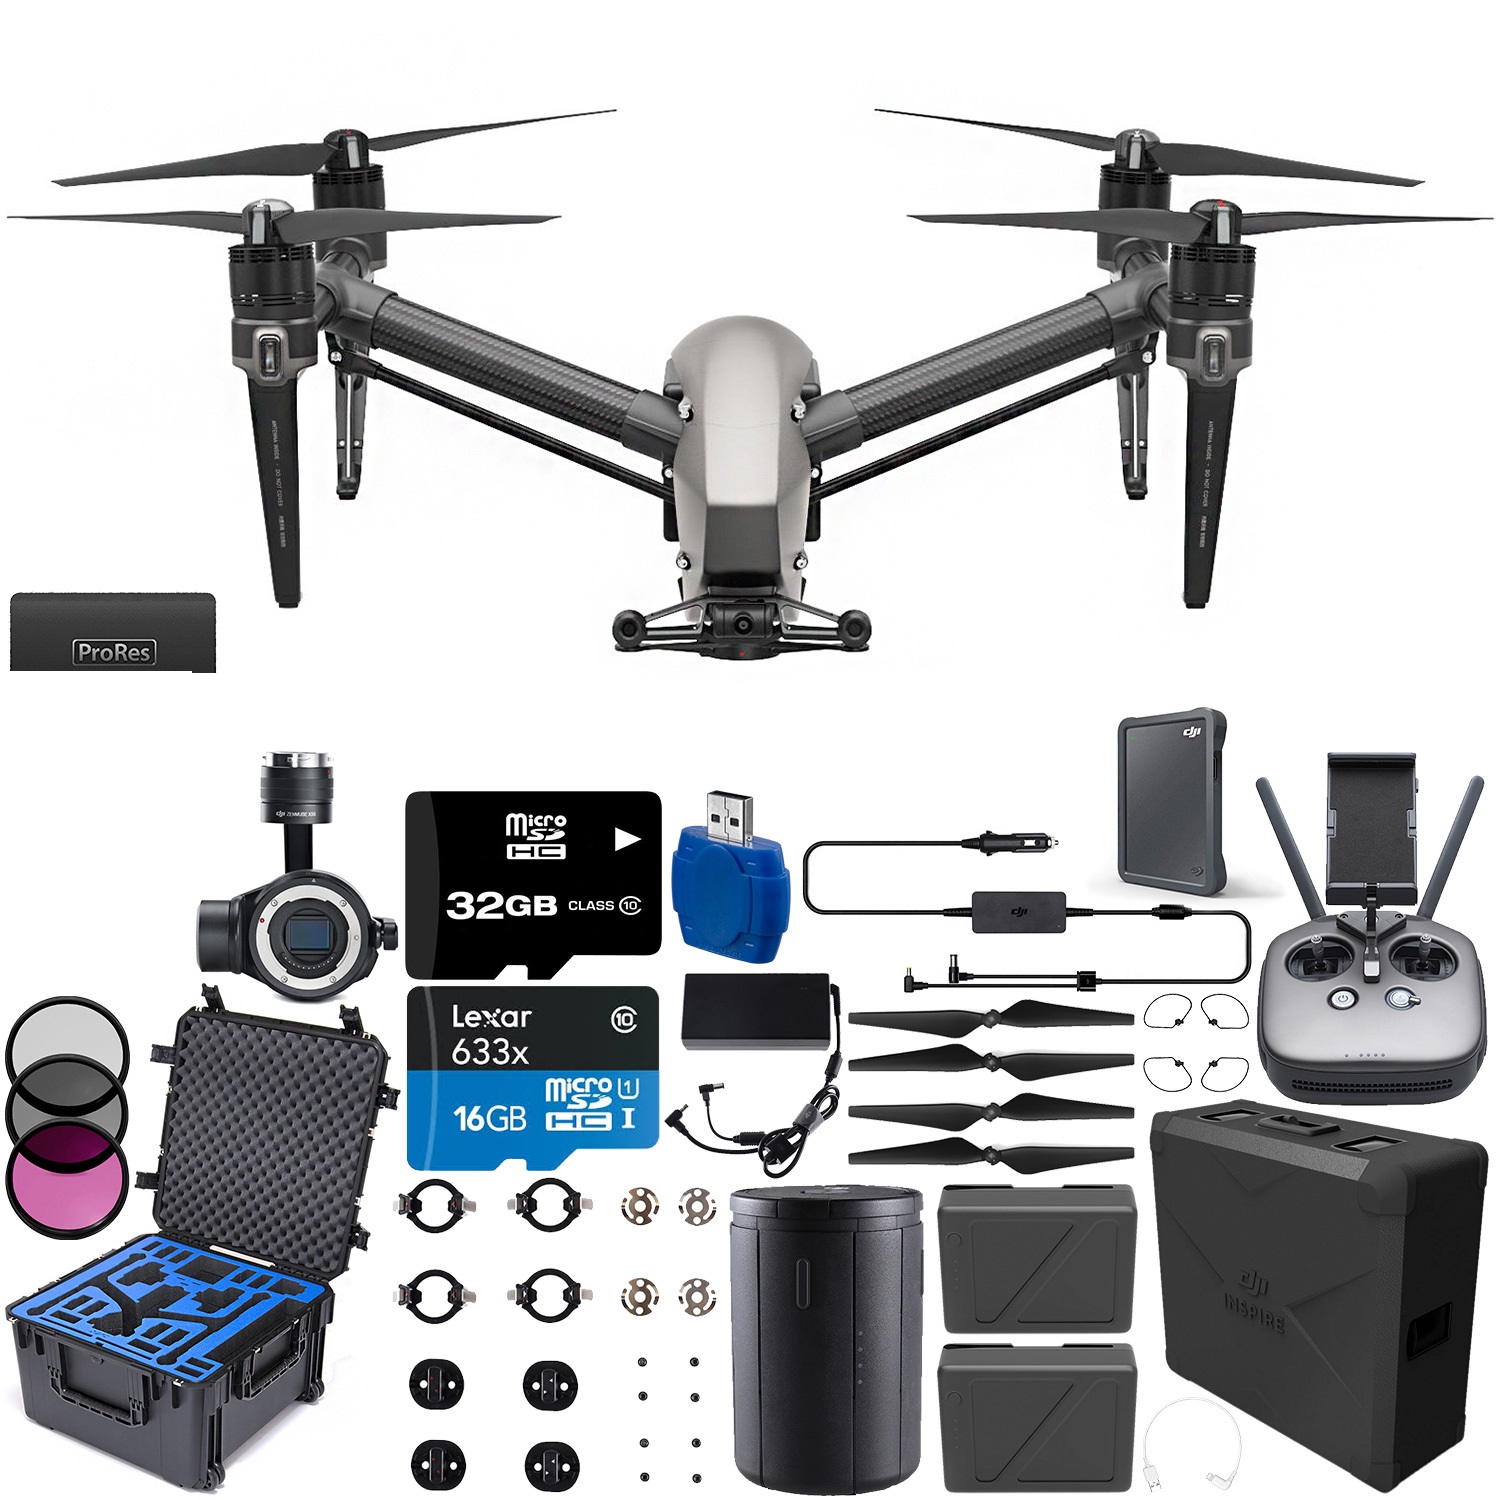 DJI Inspire 2 Quadcopter with Apple Pro Res License Accessory Bundle